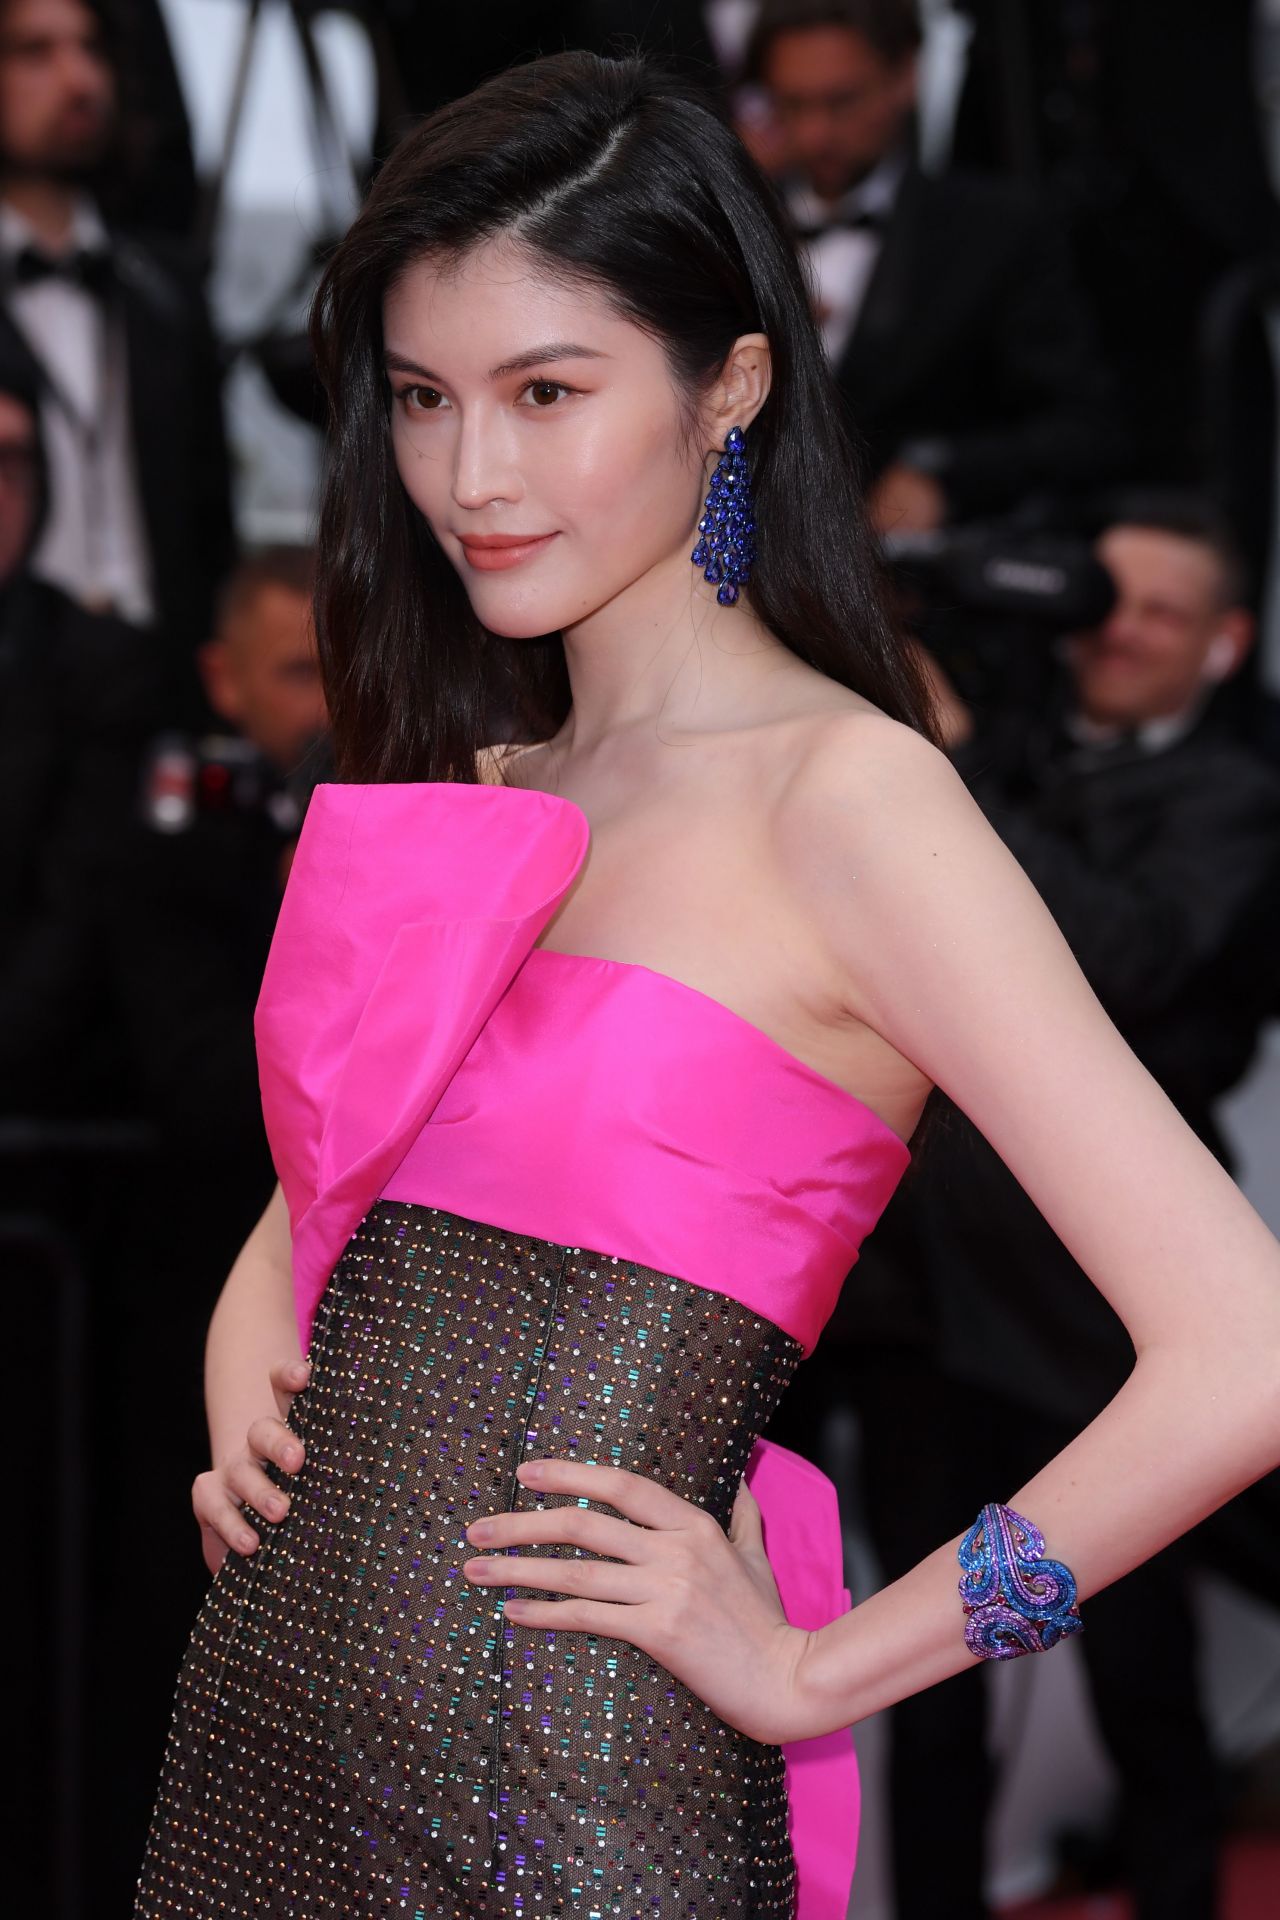 Sui He – “The Best Years of a Life” Red Carpet at Cannes Film Festival